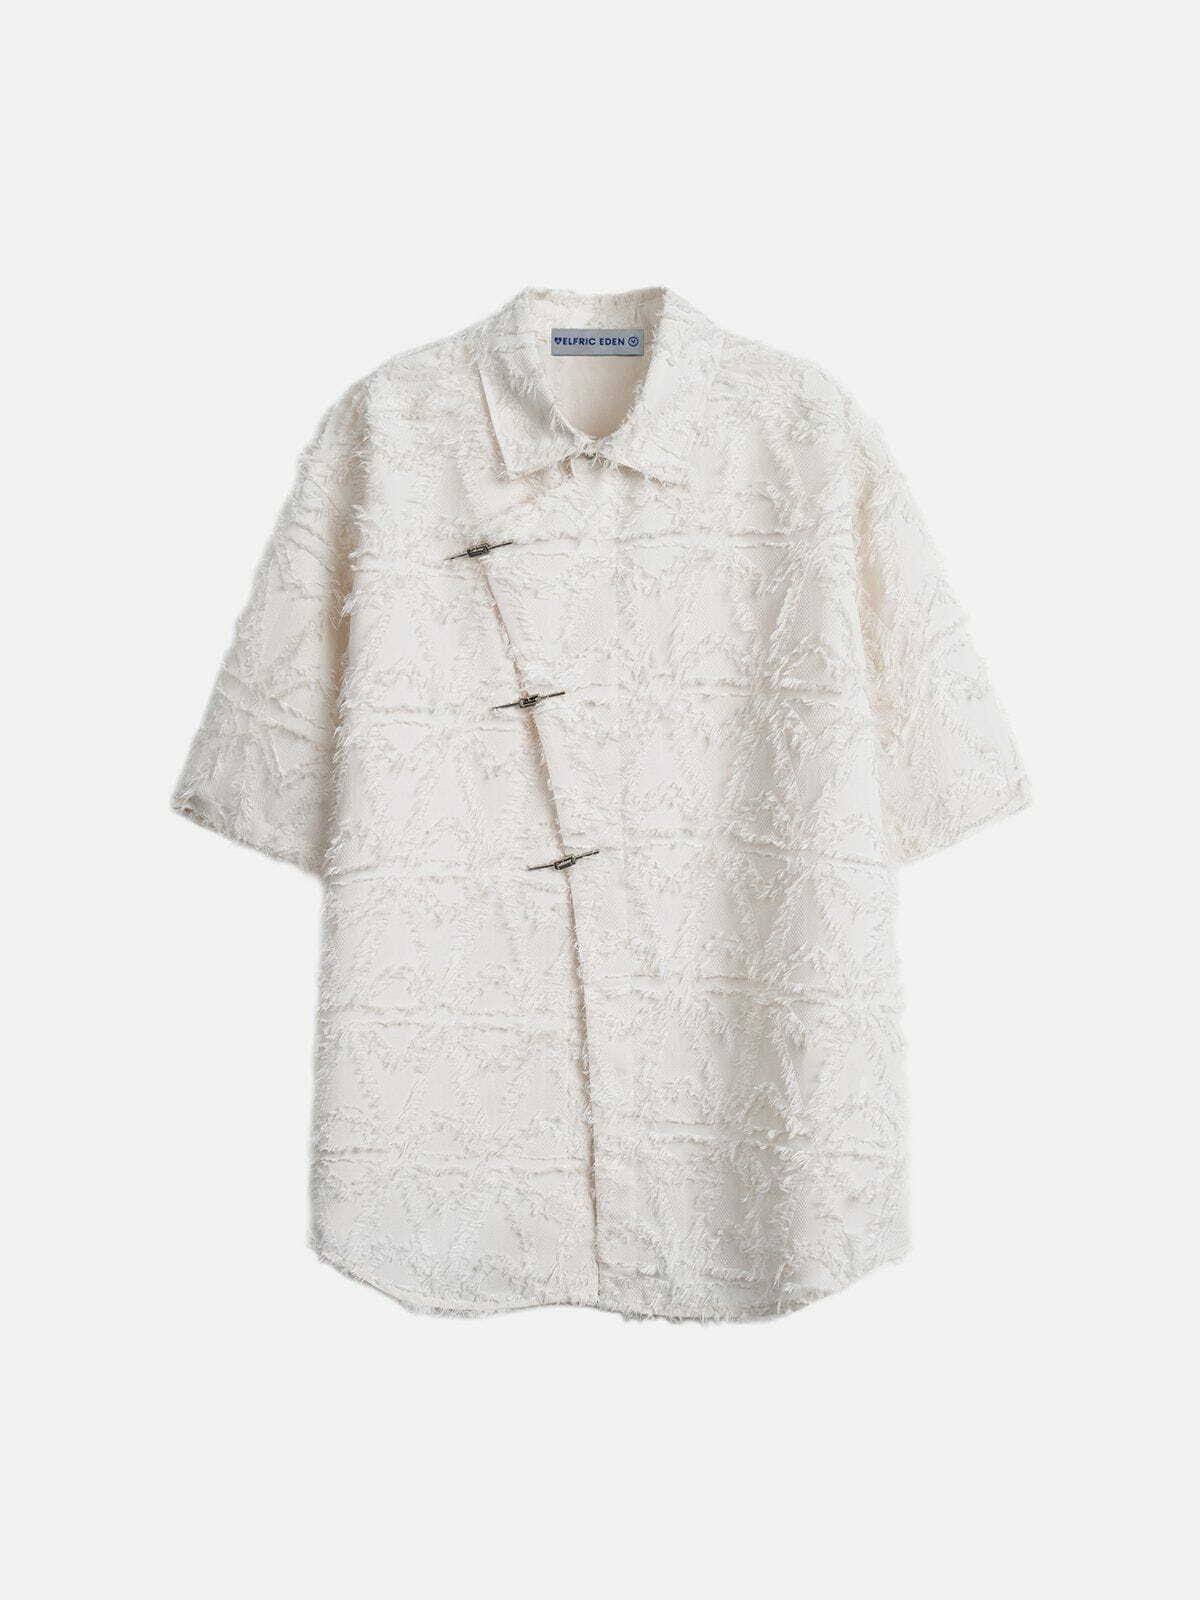 chic diagonal placket shirt with tassels youthful edge 2009